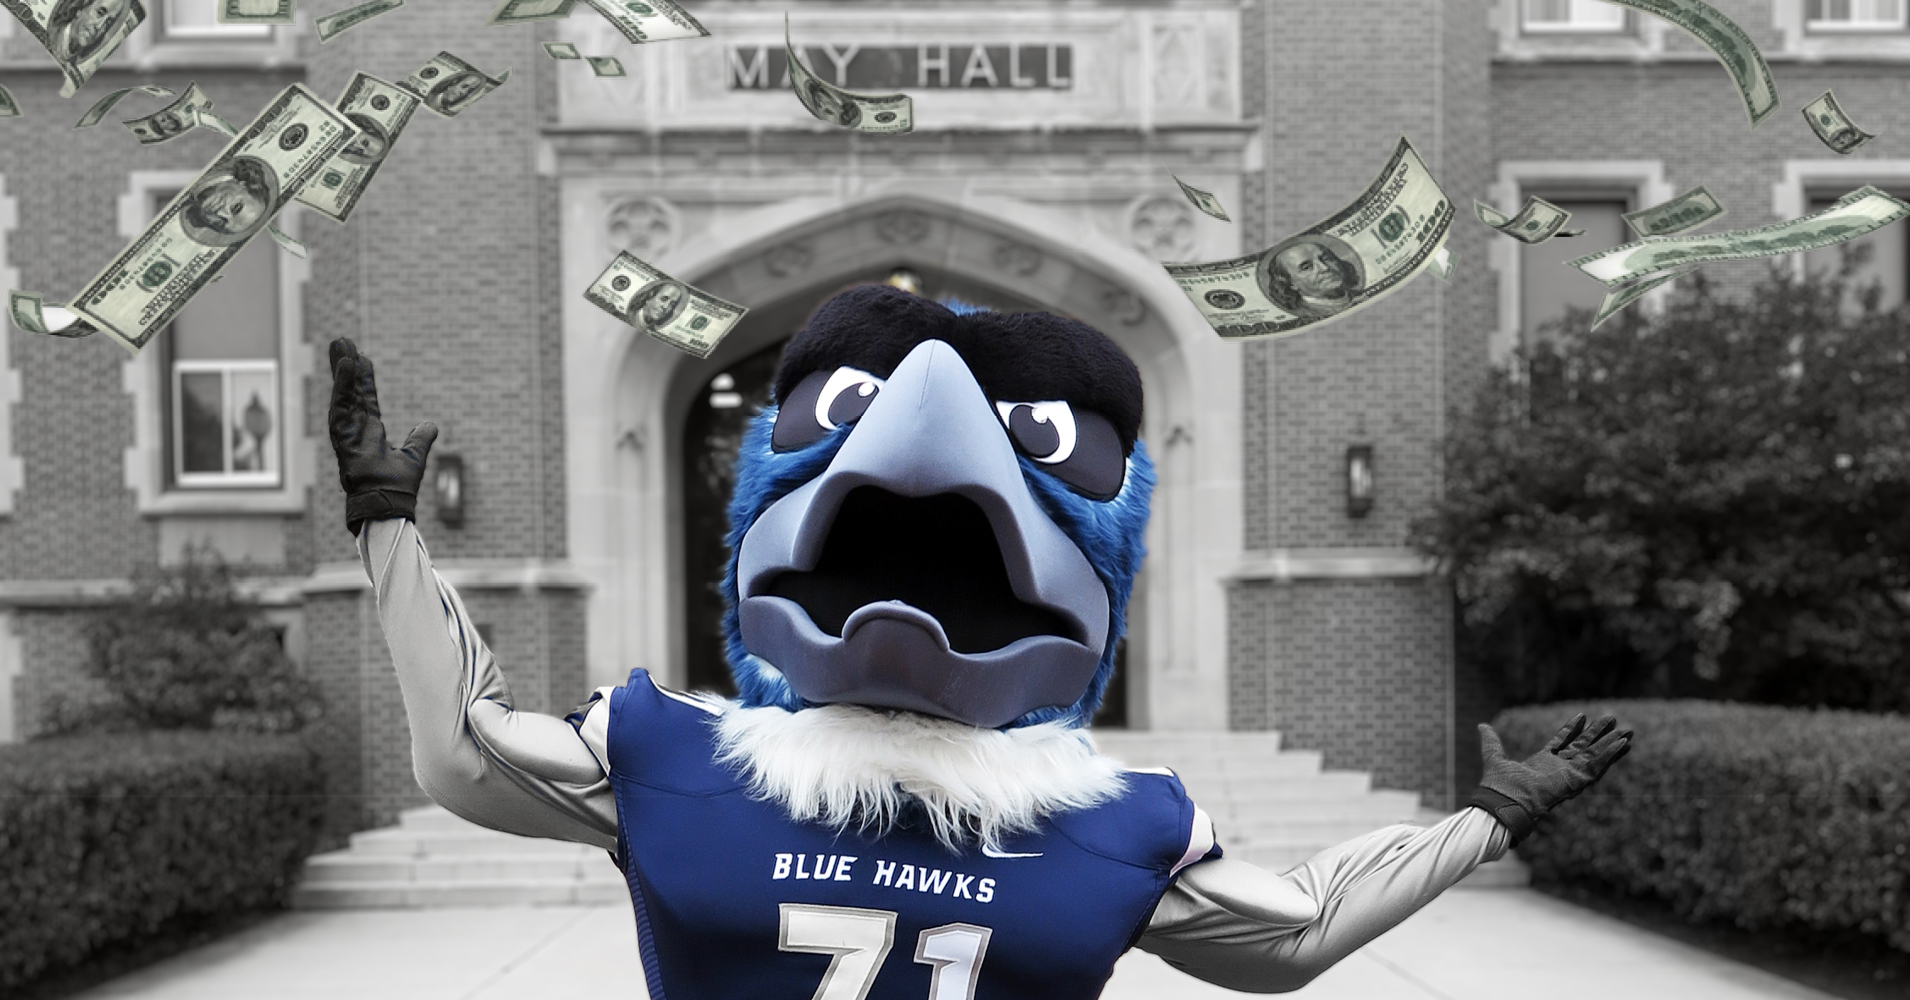 Buster Blue Hawk Mascot with money raining down on him